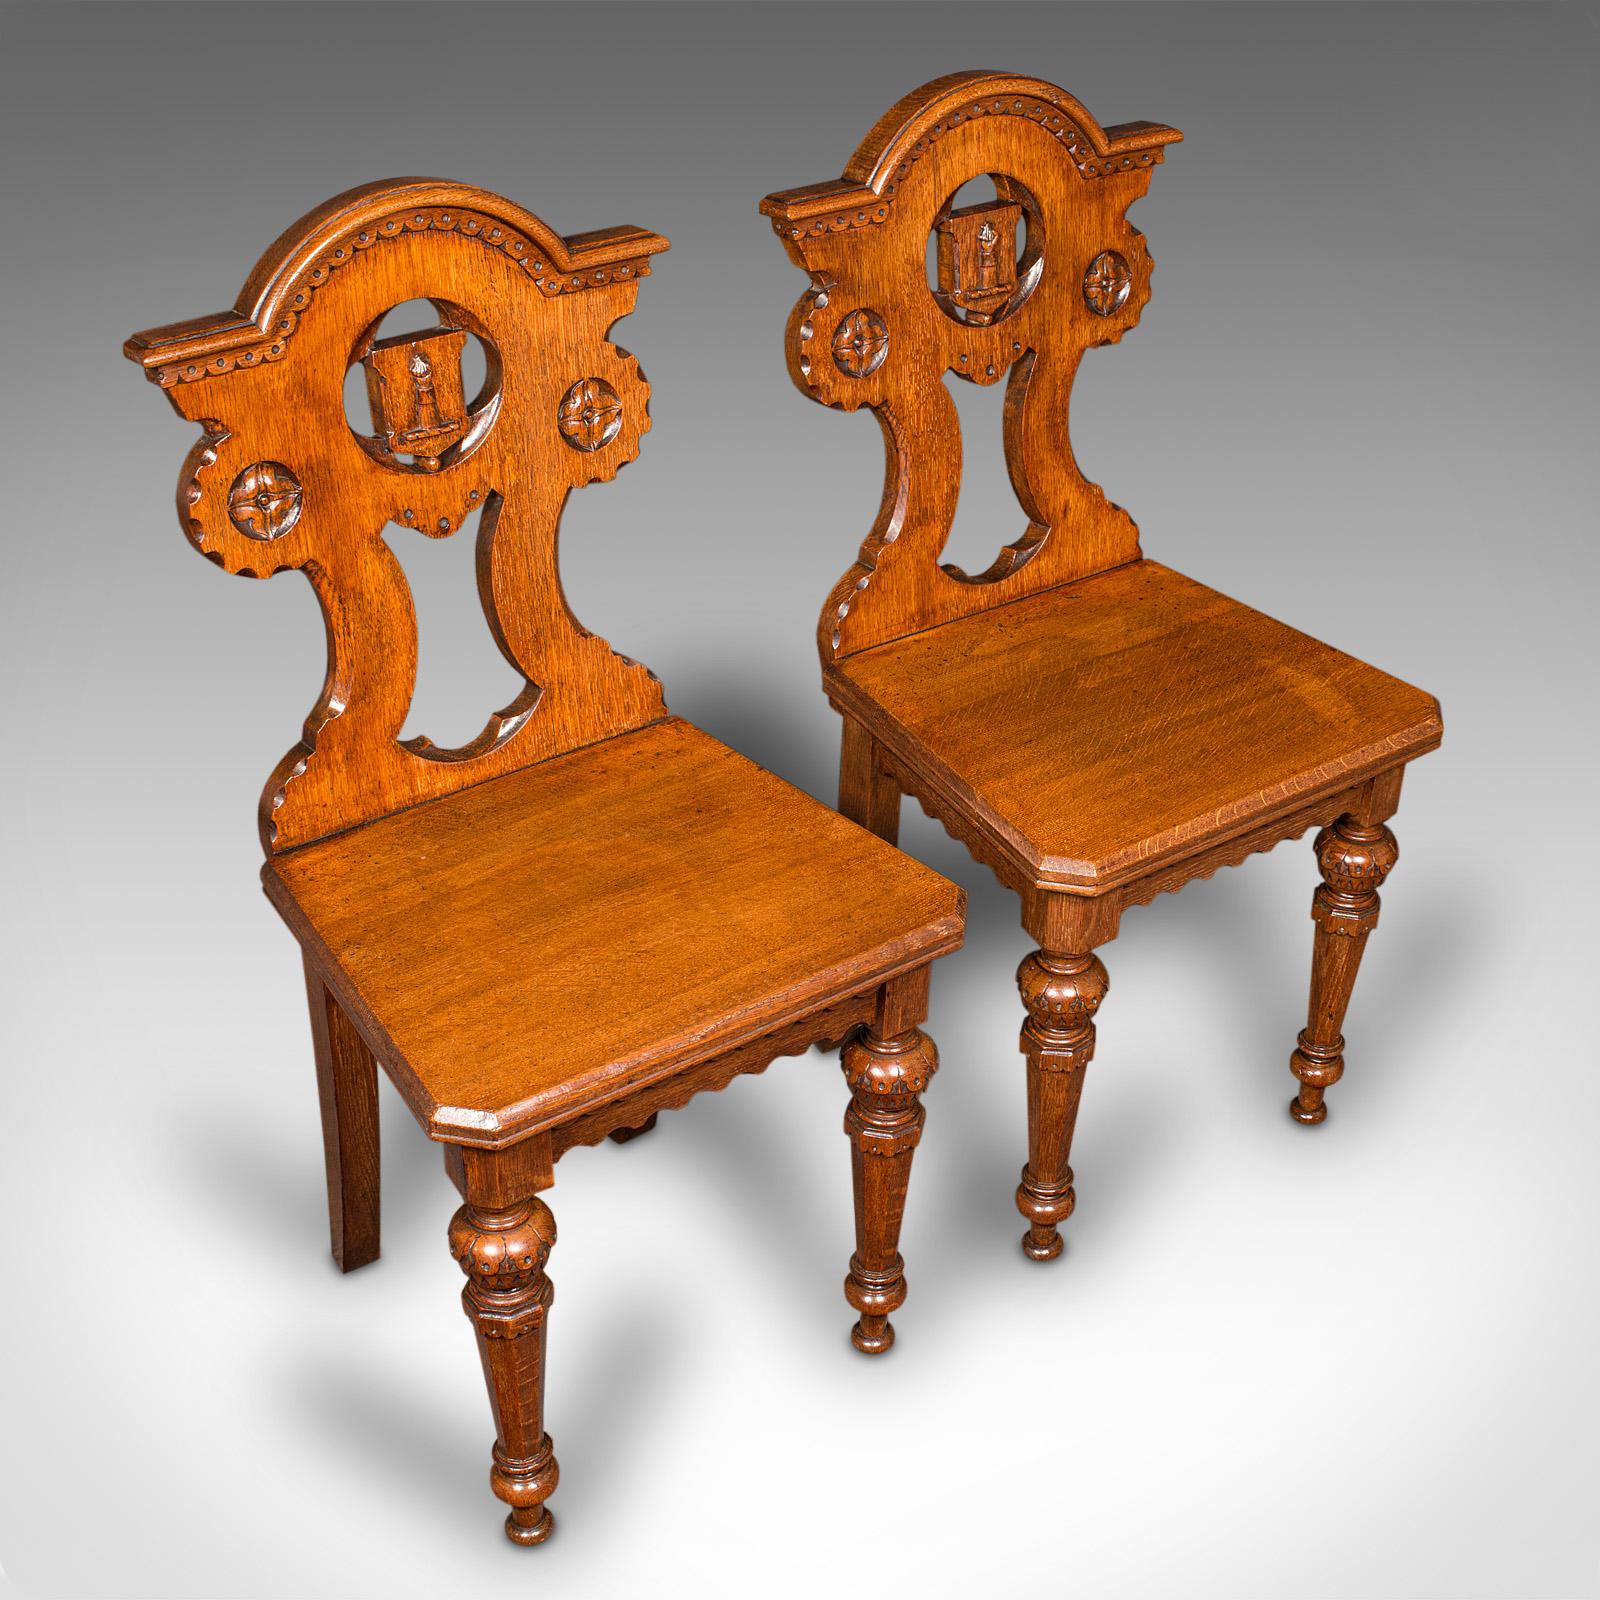 Pair Of Antique Hall Chairs, Scottish, Oak, Seat, Arts & Crafts Taste, Victorian For Sale 5